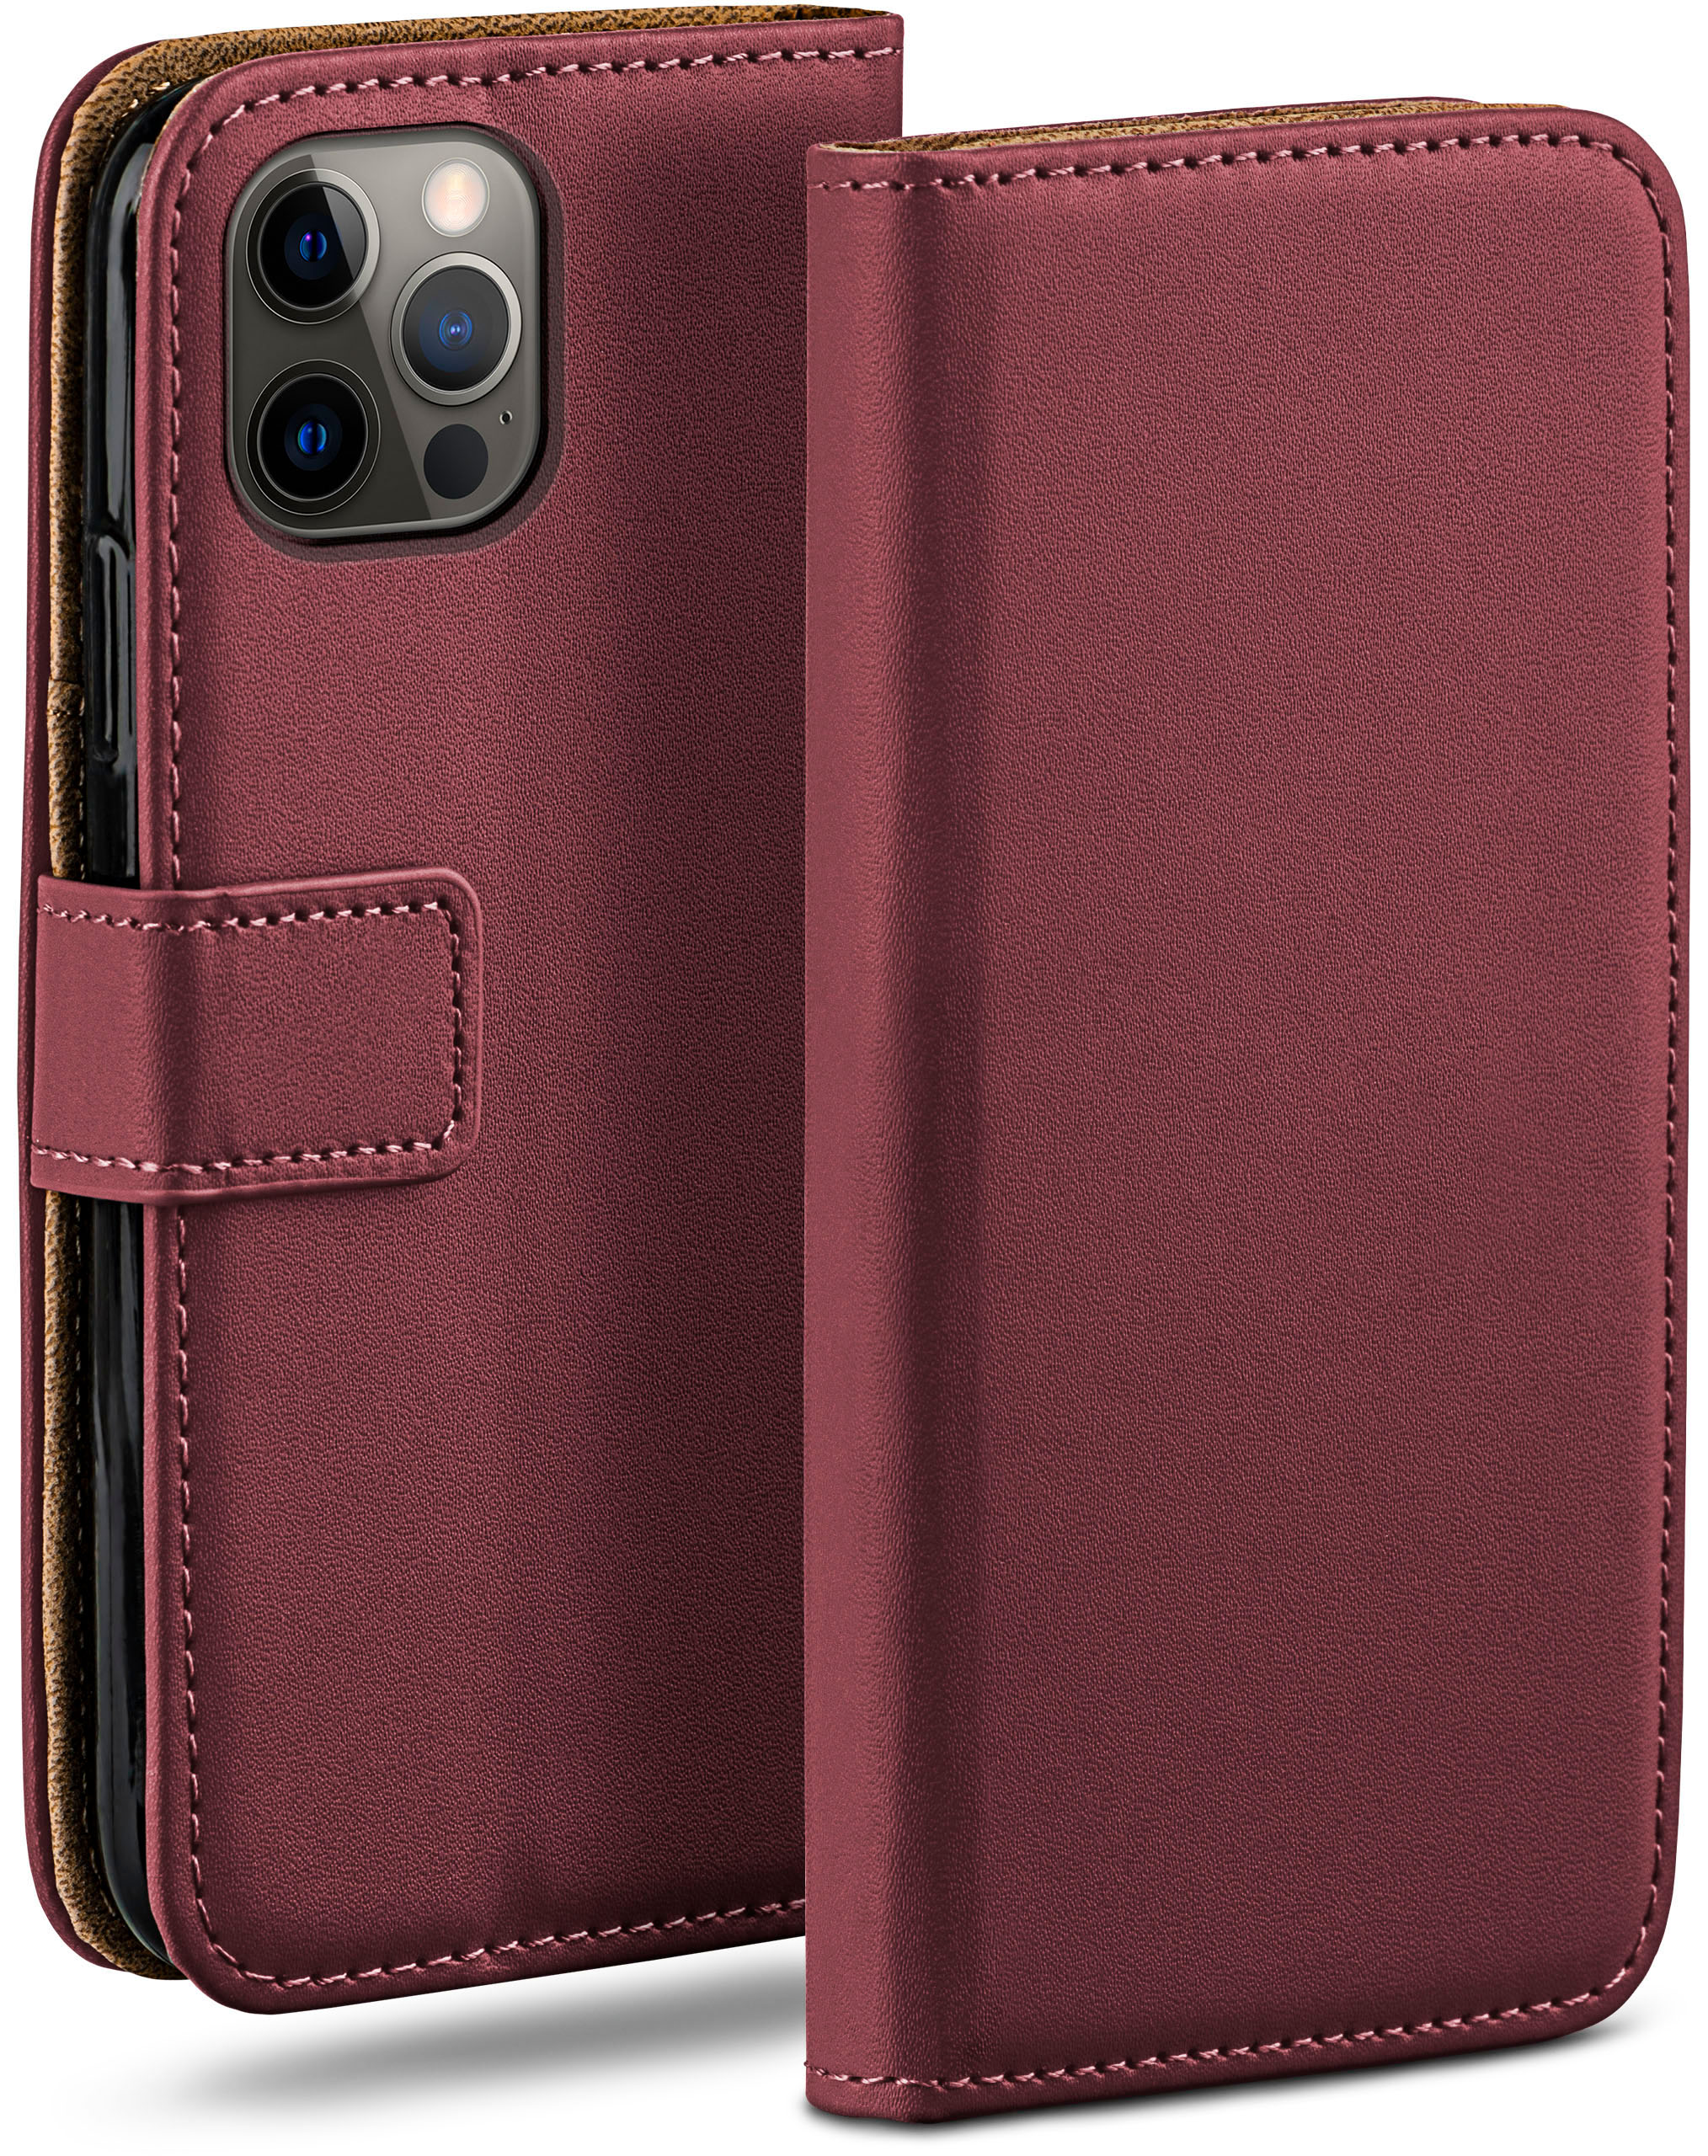 12 Book MOEX Pro, iPhone Bookcover, Maroon-Red Case, Apple,